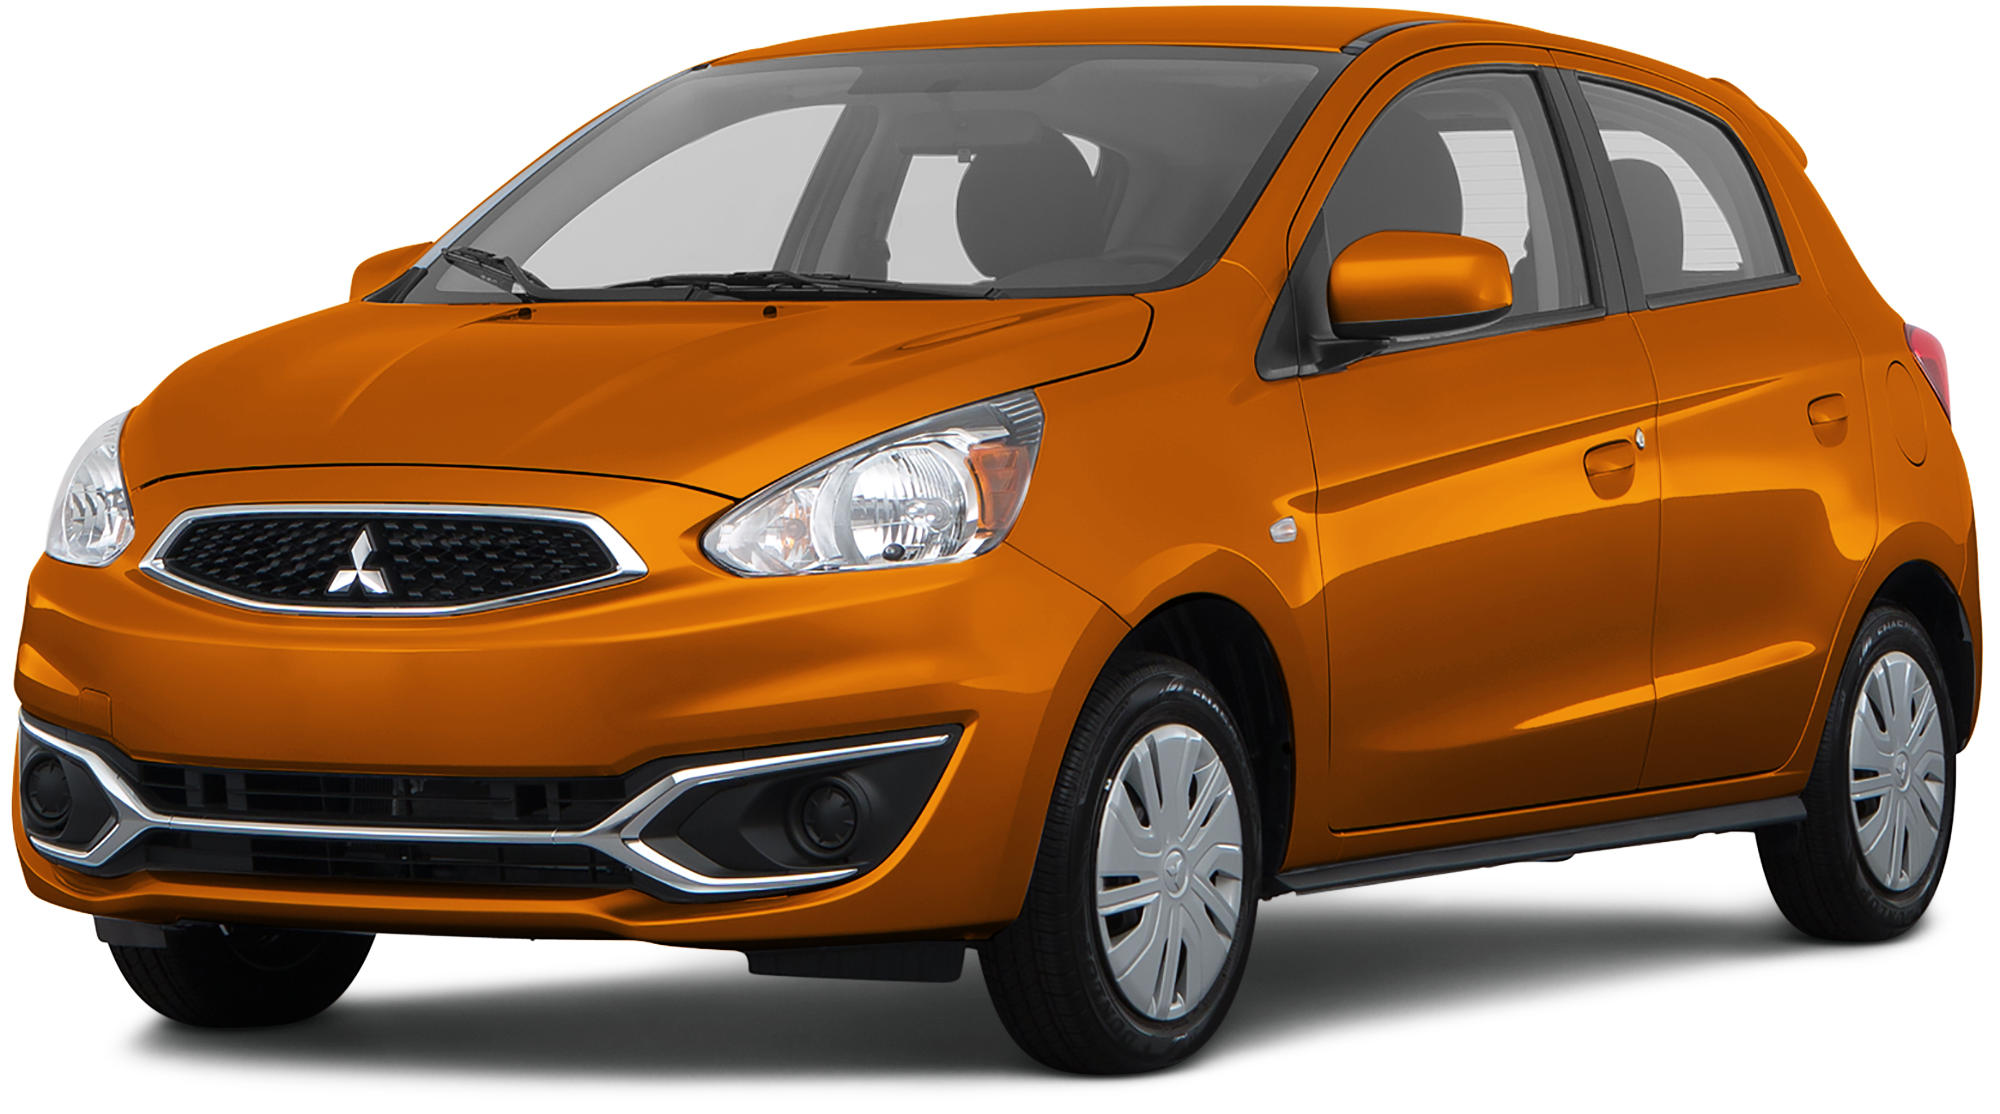 2020 Mitsubishi Mirage Incentives, Specials & Offers in Springfield IL